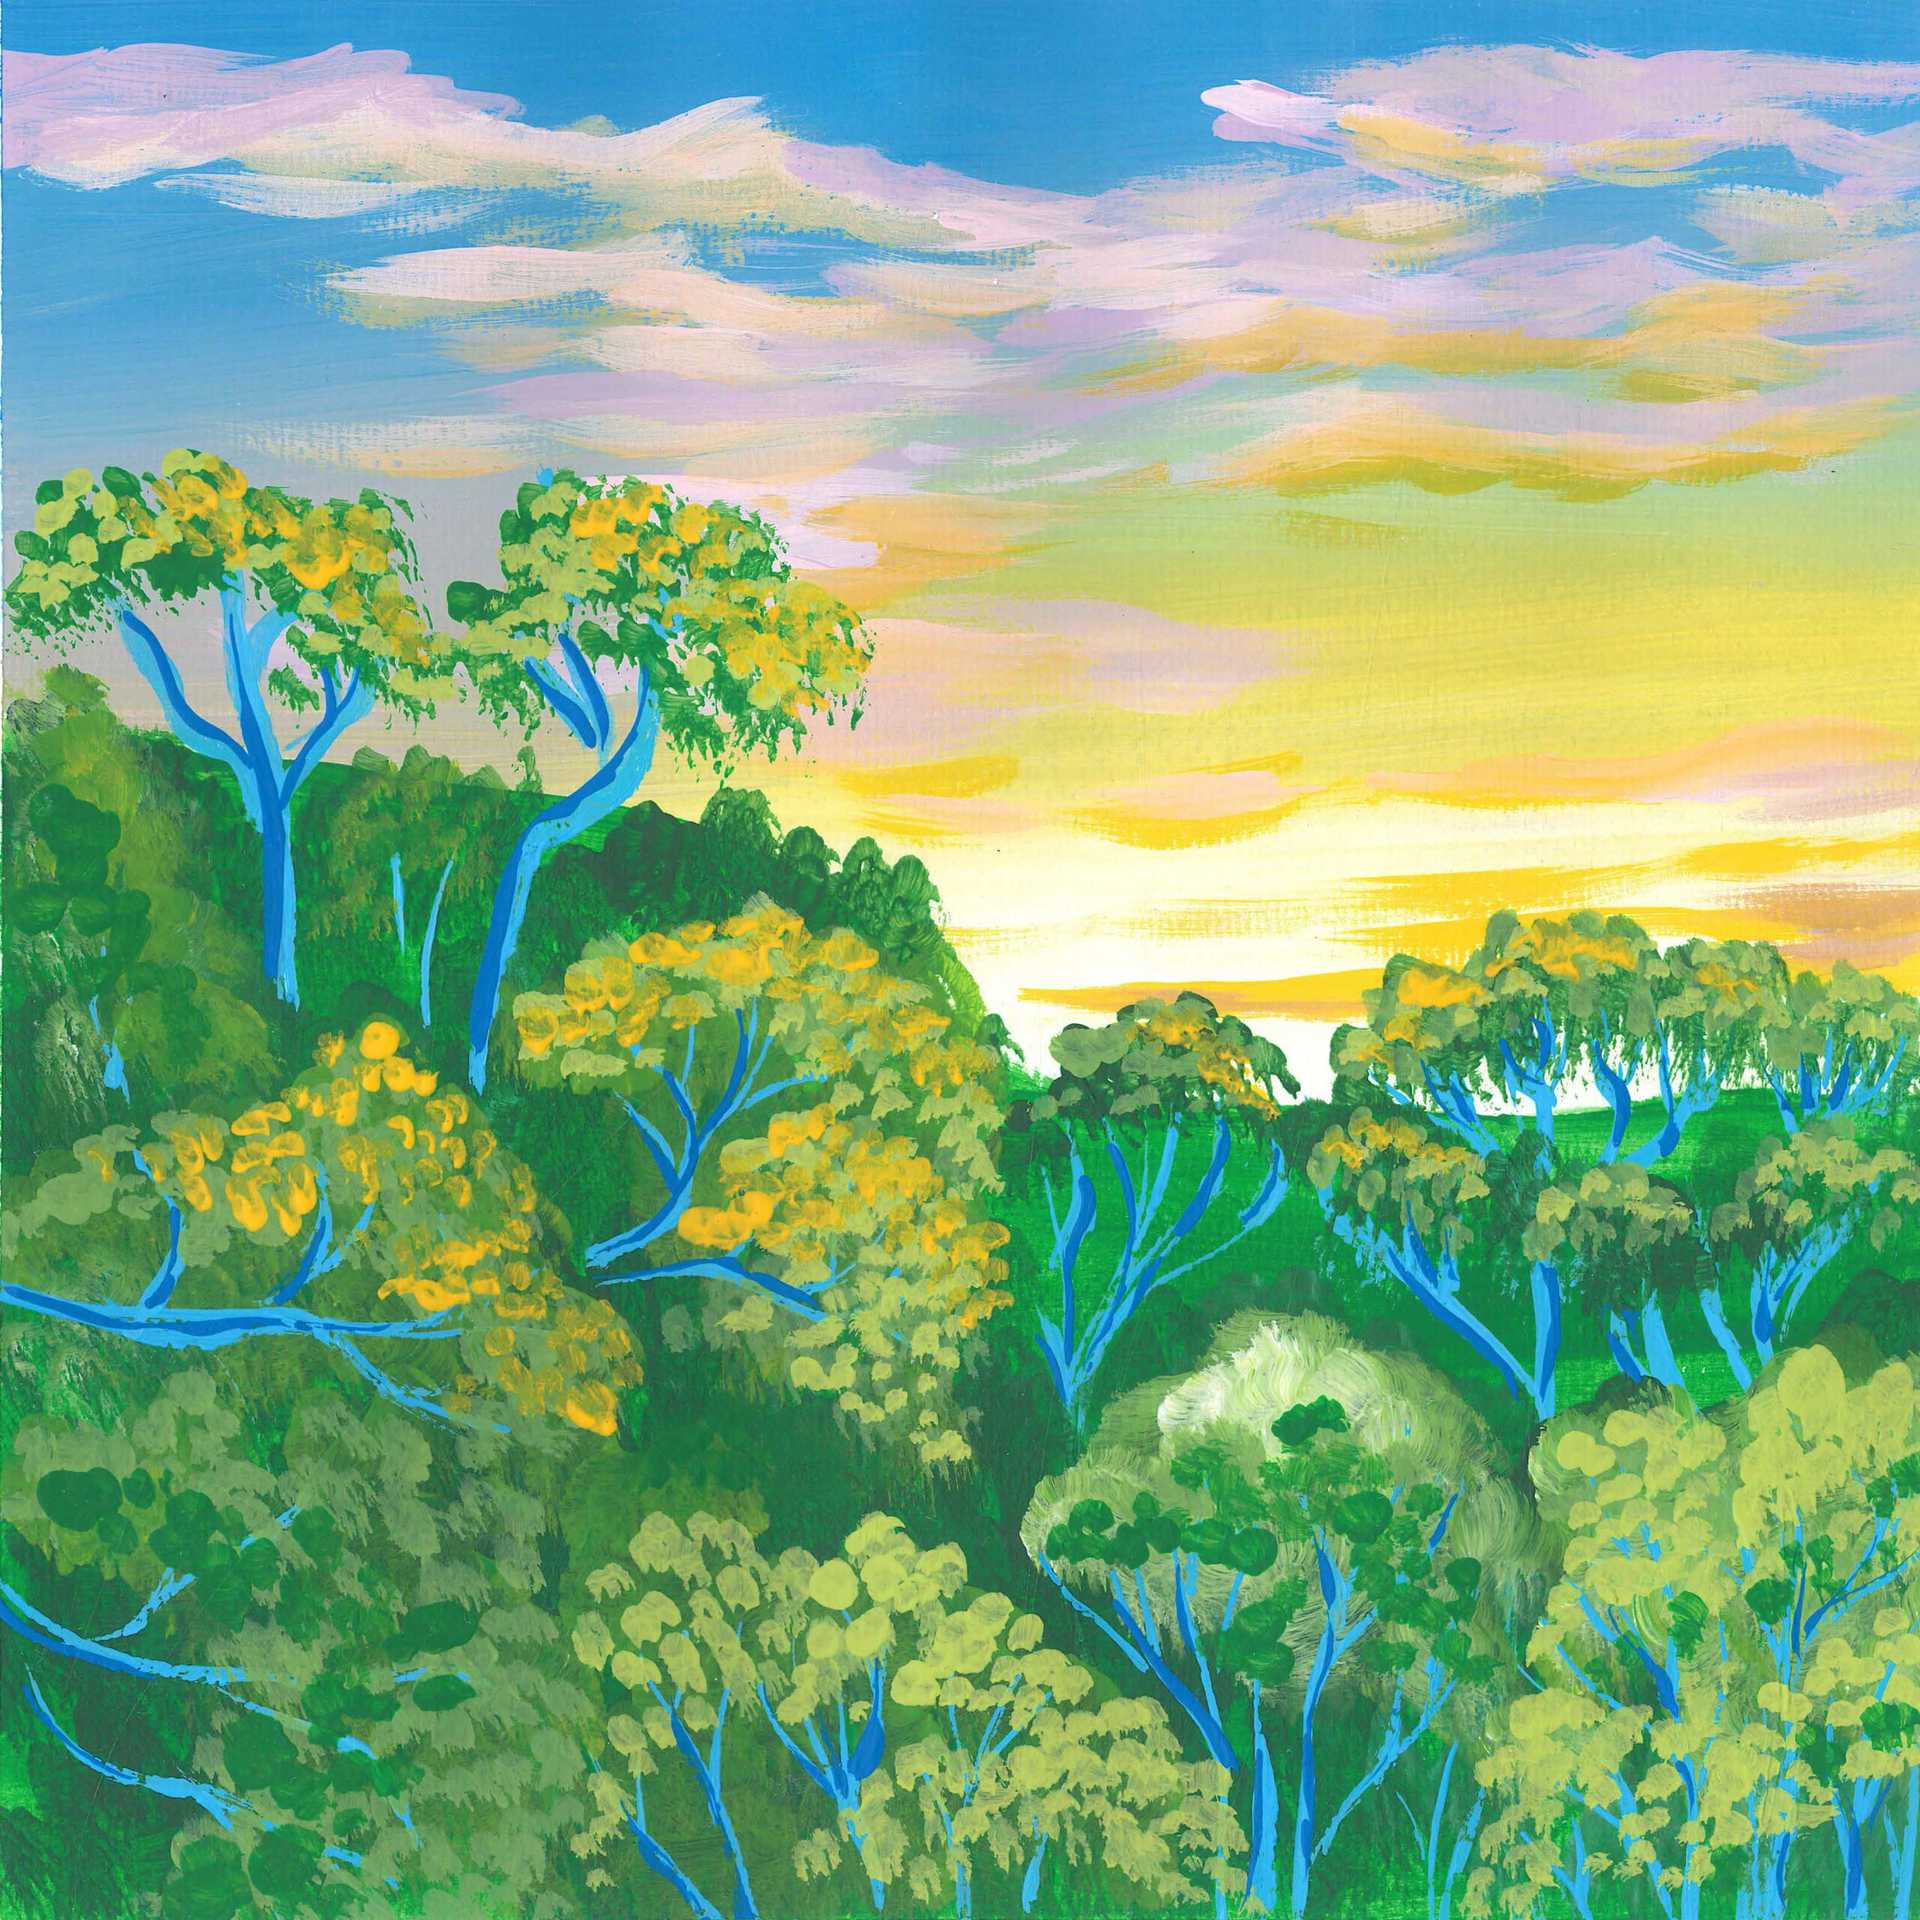 Dawn in the rainforest – Sounds of Costa Rica - nature landscape painting - earth.fm